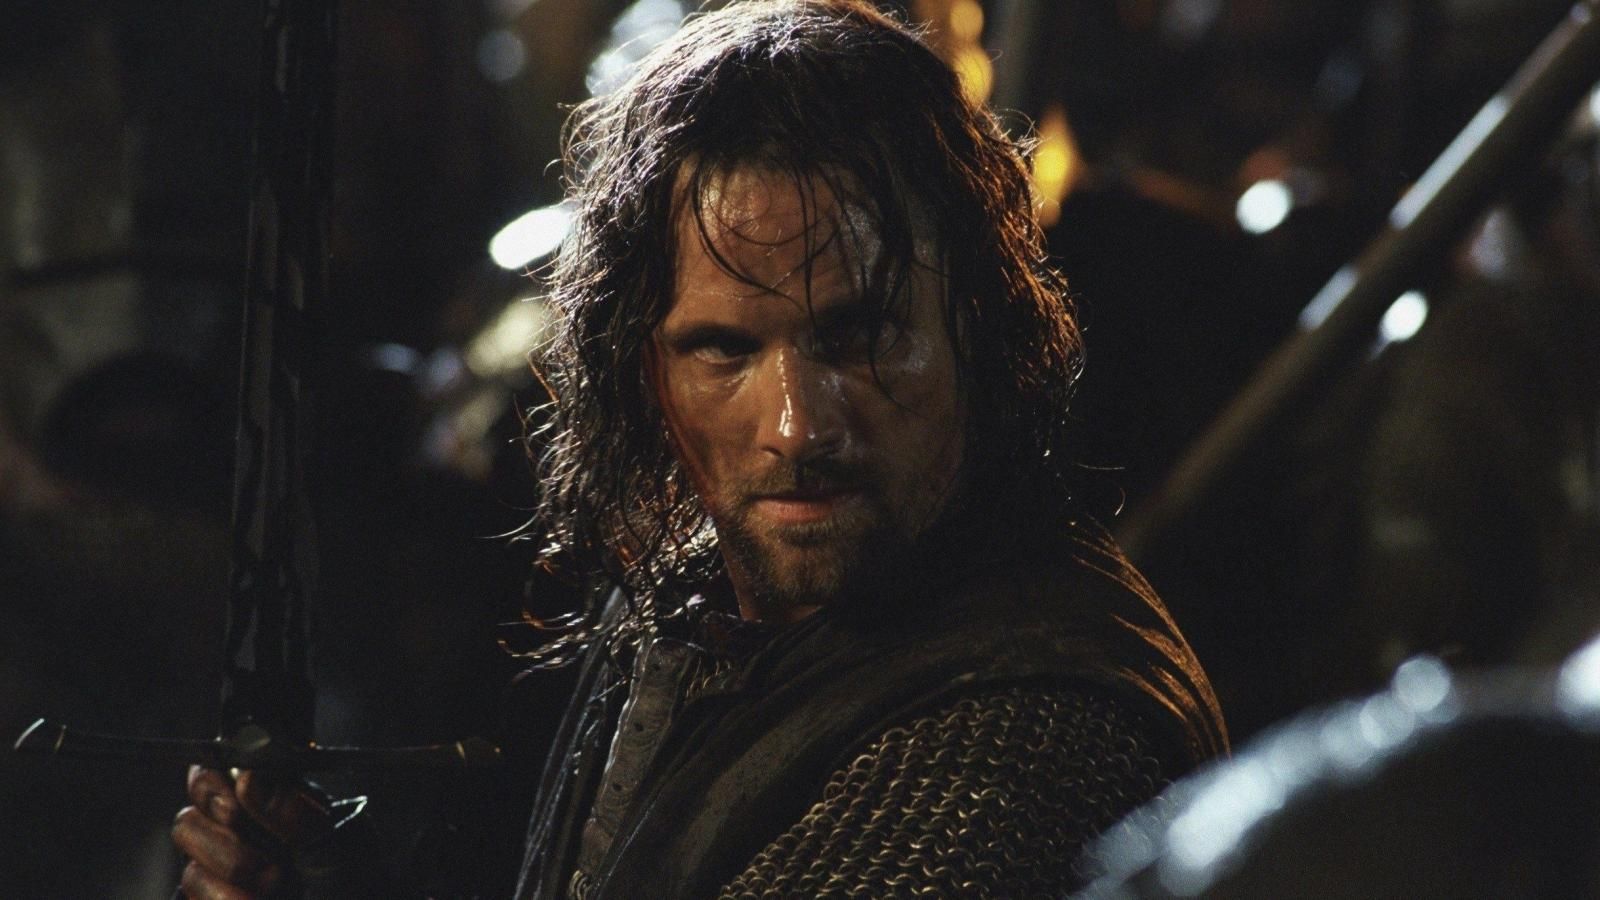 Aragorn - Lord of the Rings